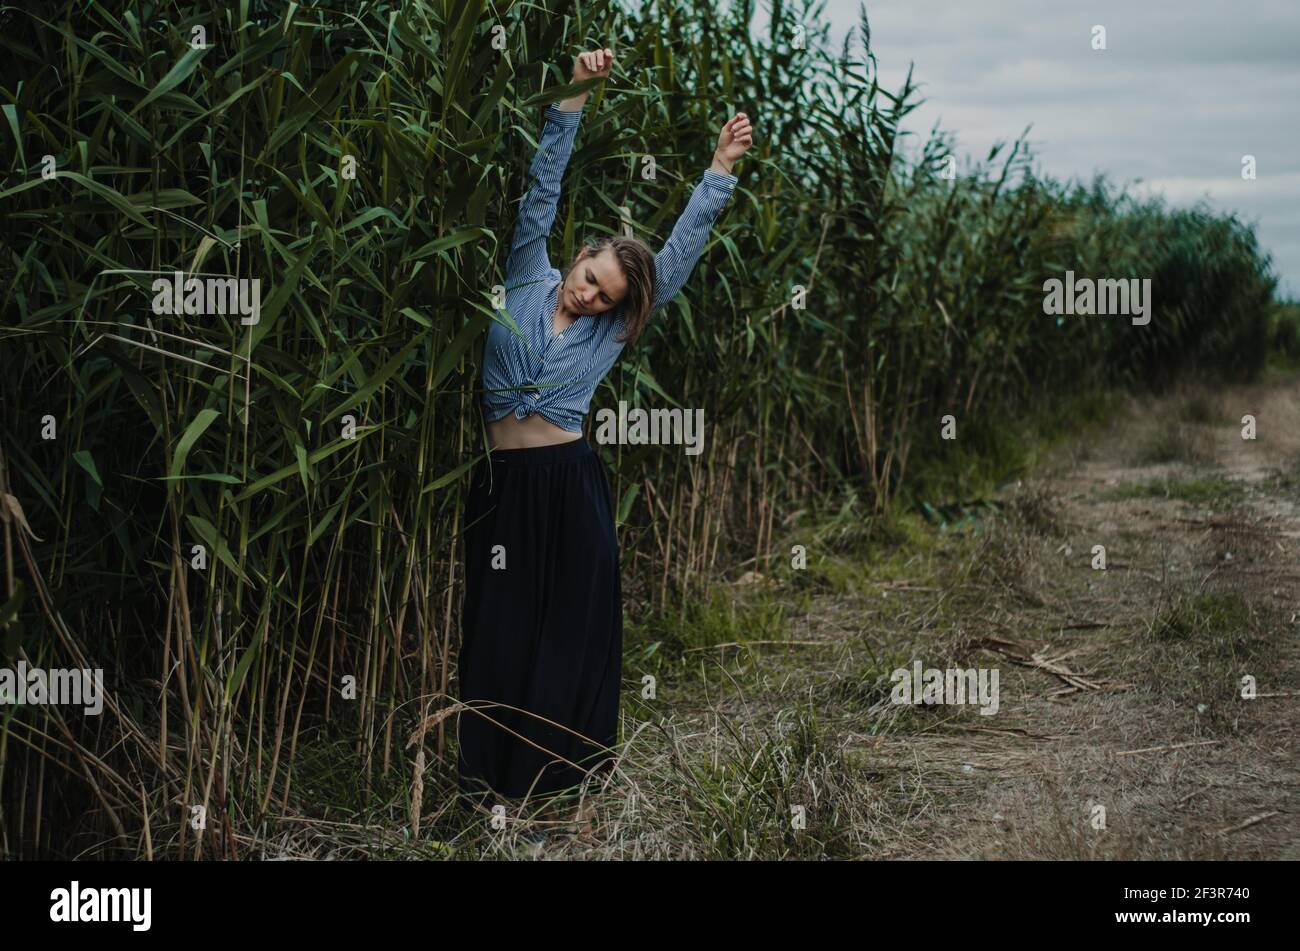 Full body artistic portrait of a woman with arms outstretched near red reeds on a path, moody vibe Stock Photo